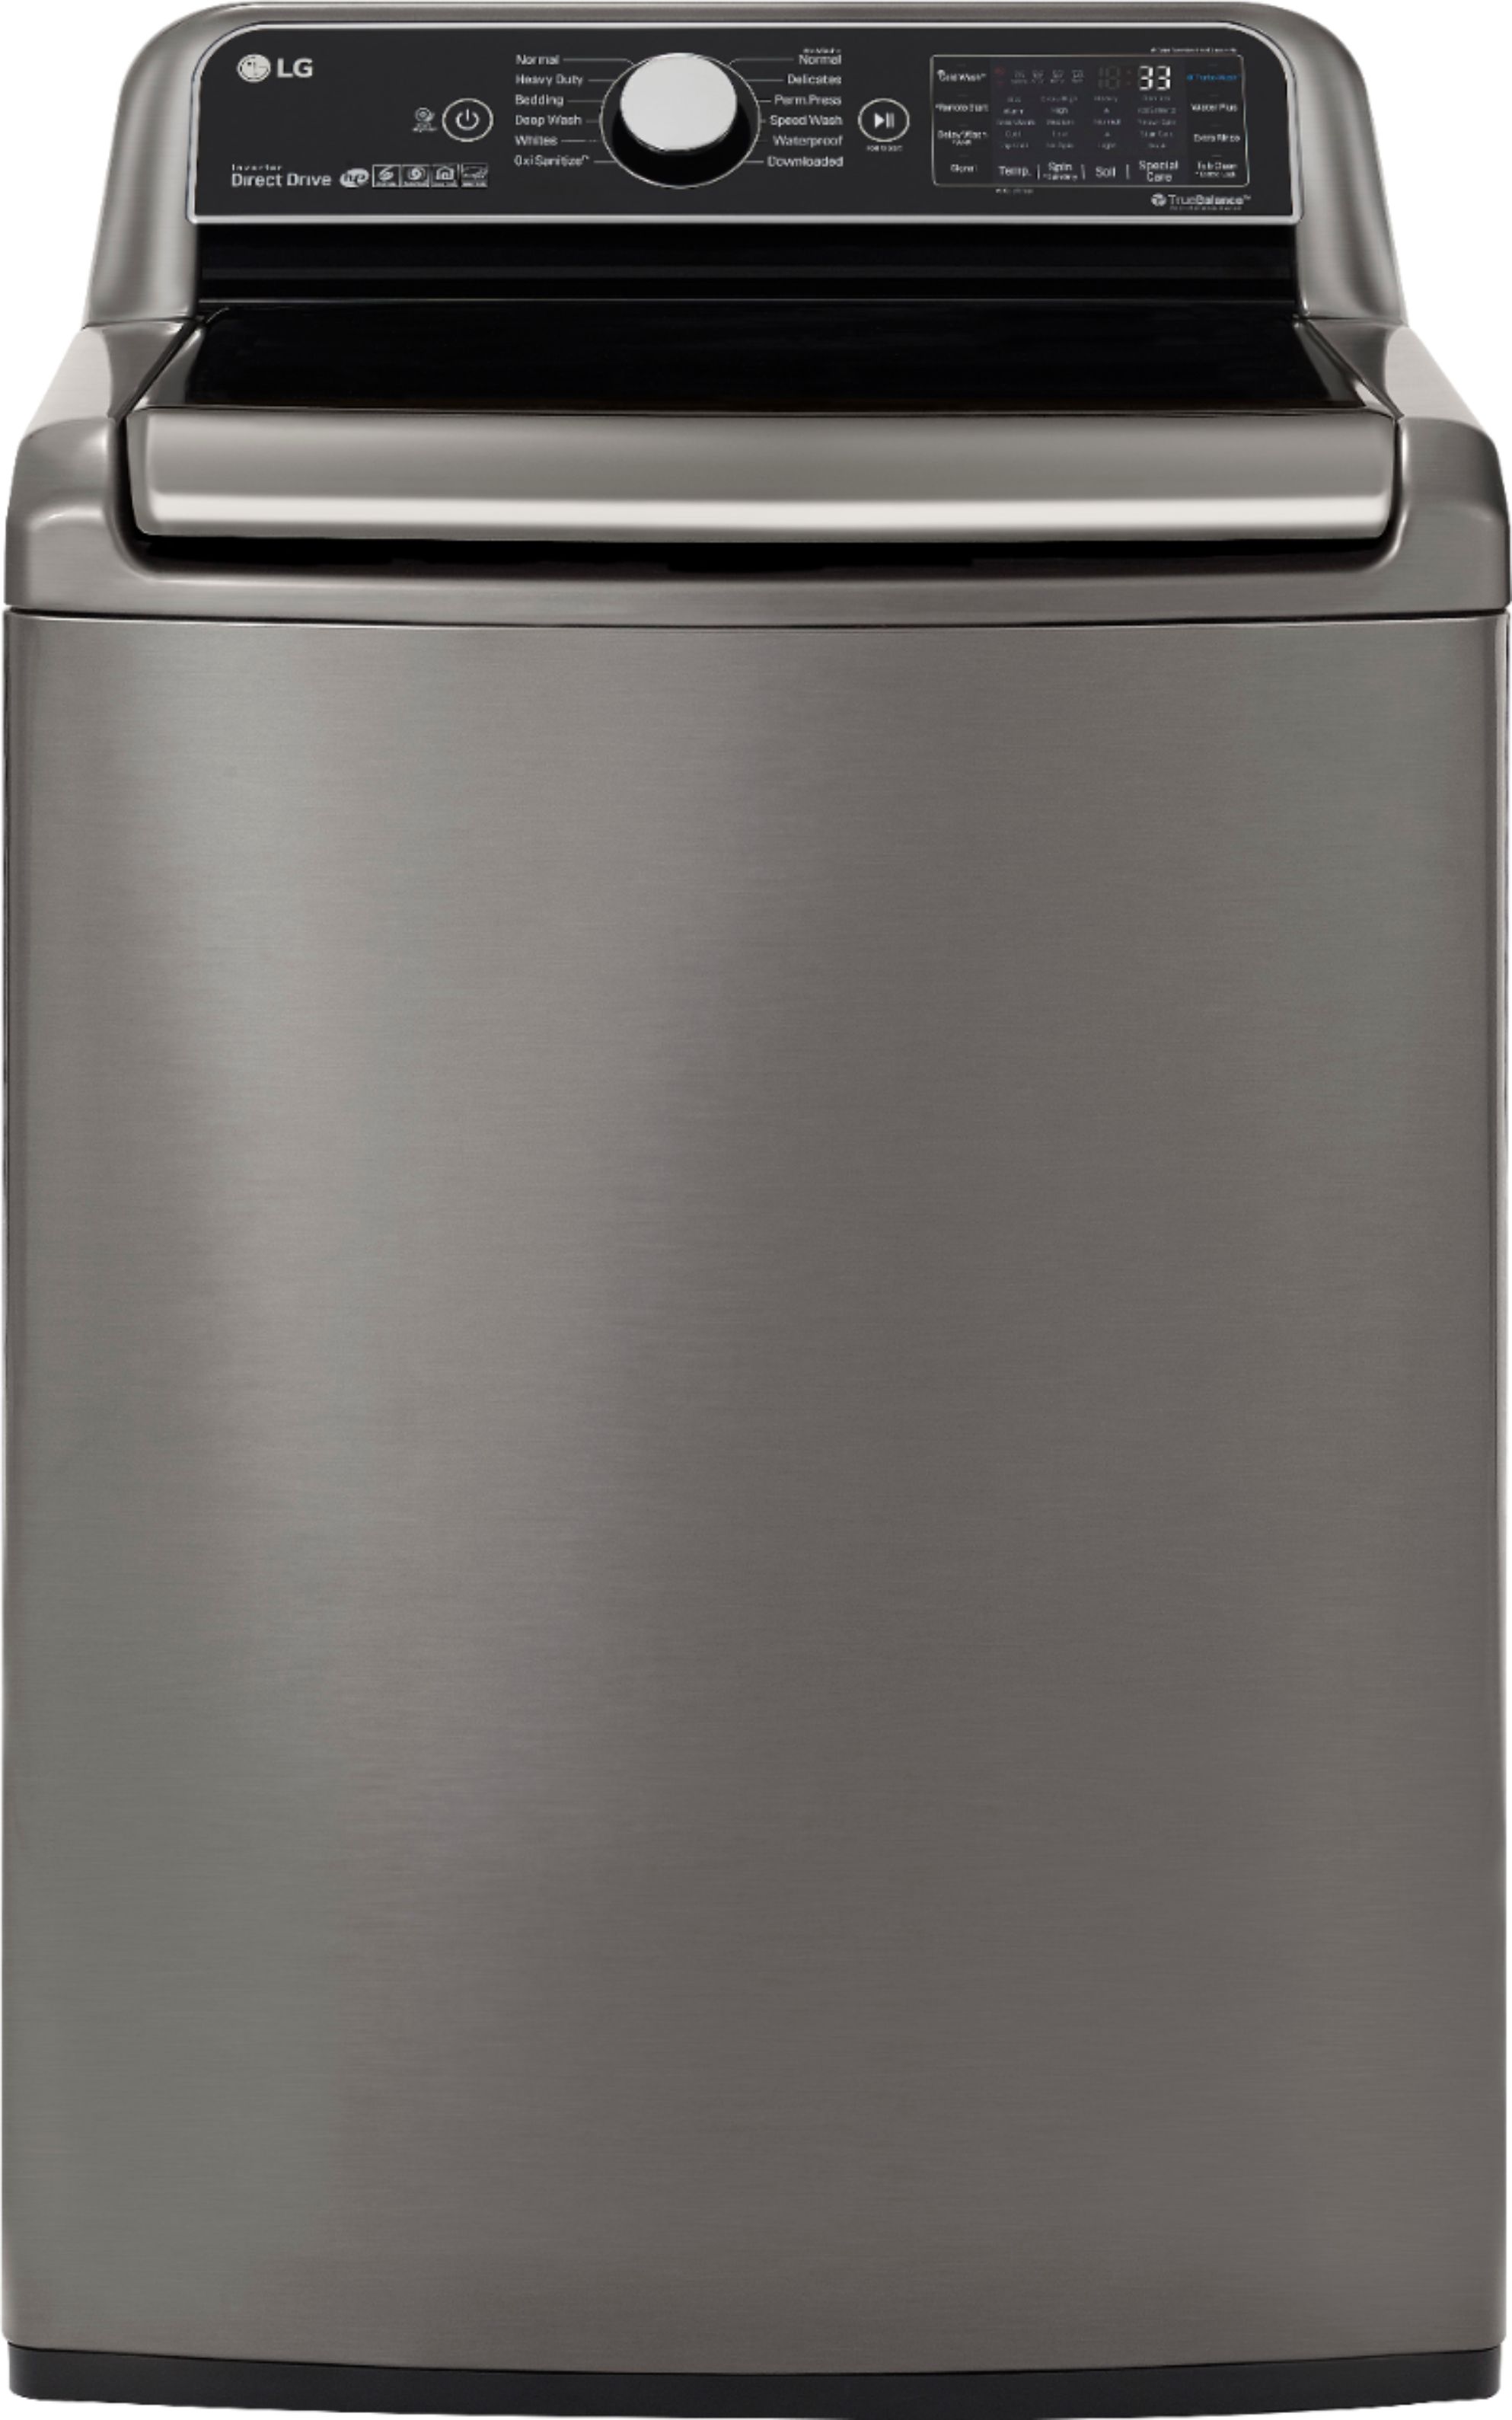 LG - 5.5 Cu. Ft. 12-Cycle Top-Loading Washer - Graphite Steel